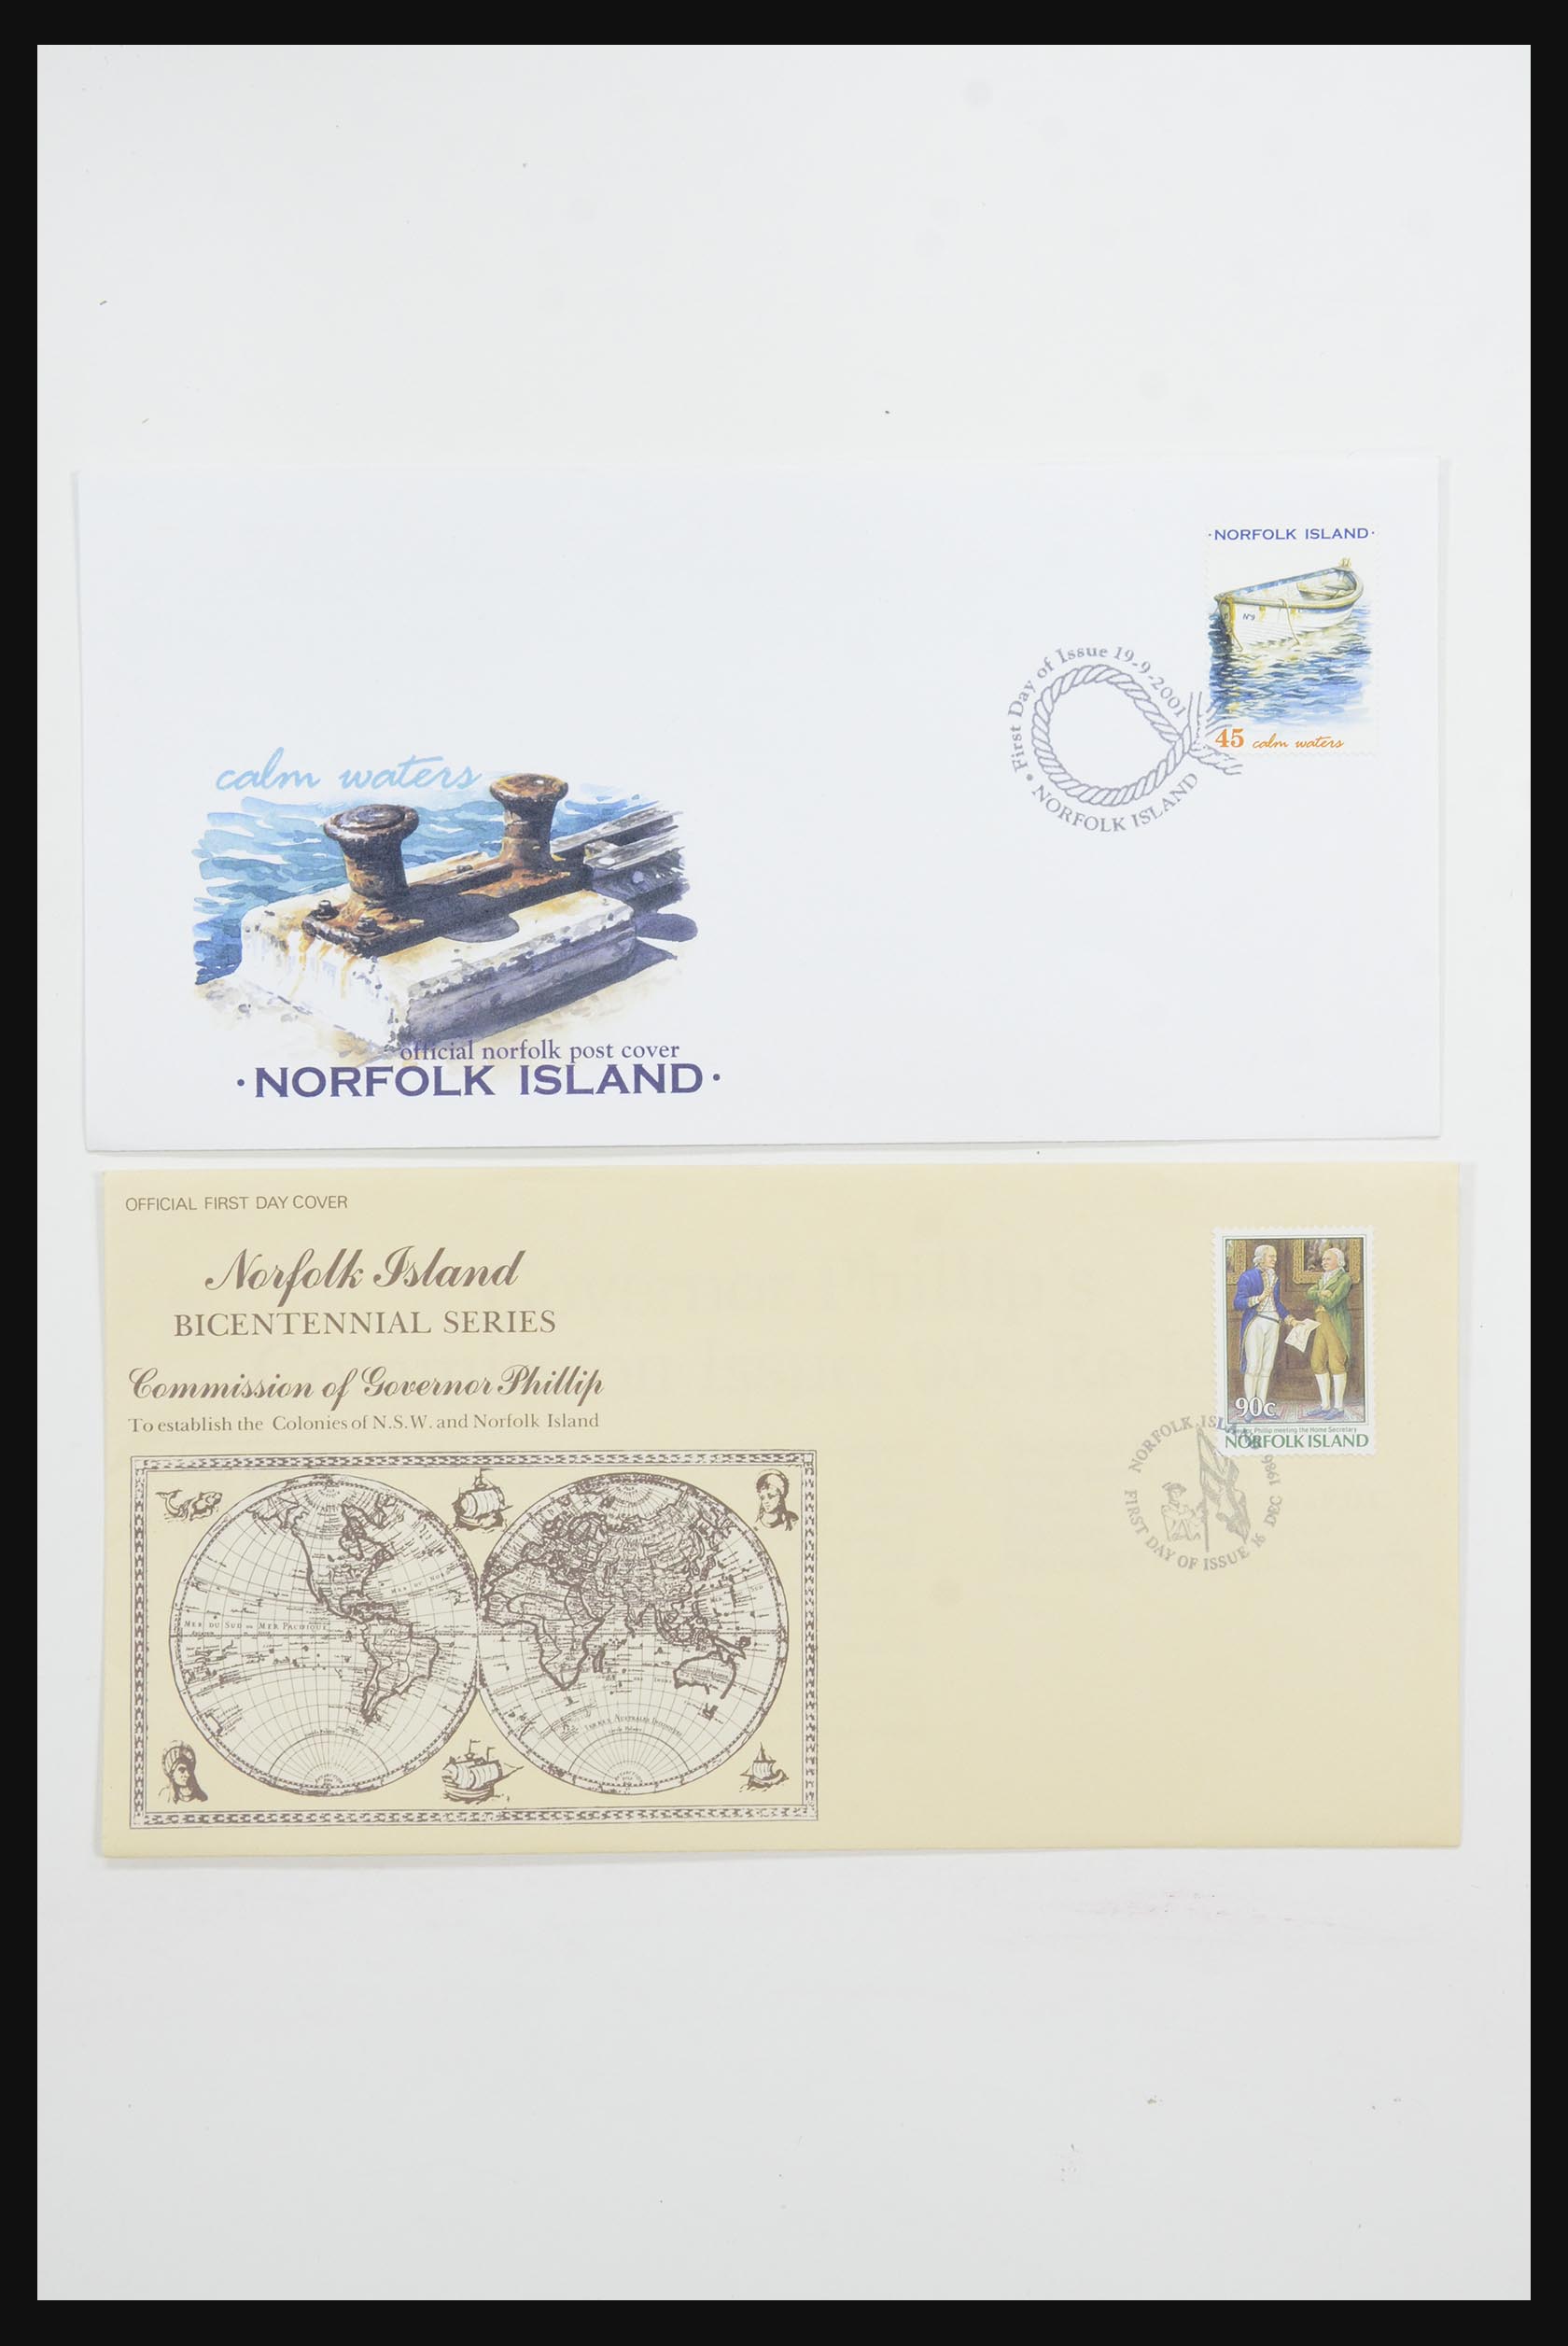 31726 057 - 31726 Great Britain and colonies covers and FDC's 1937-2001.